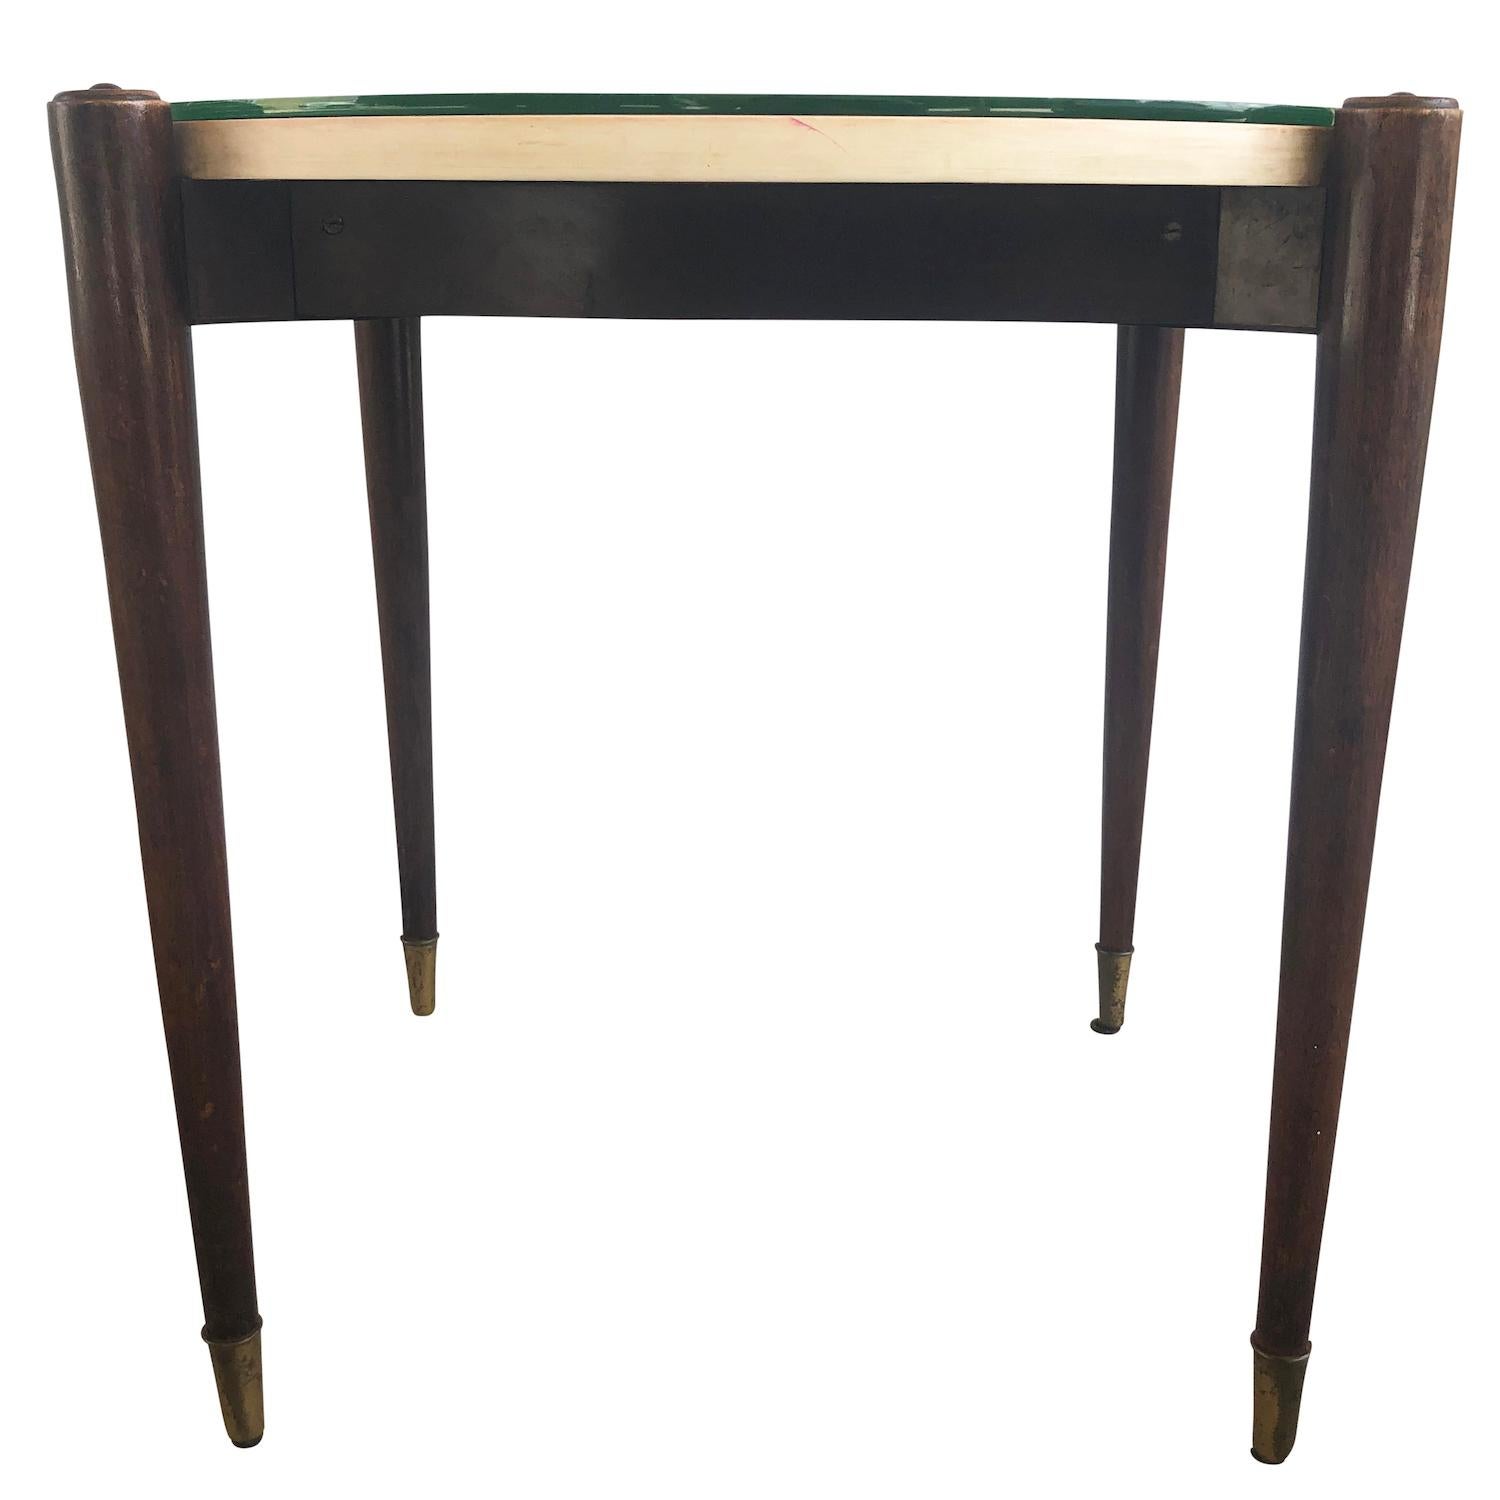 A unique side table tapered on four legs, made of mahogany by Paolo Buffa. The table is in very good condition, underneath the glass top there is an insert panel with delicate floral inlay decor. Wear consistent with age and use, circa 1950